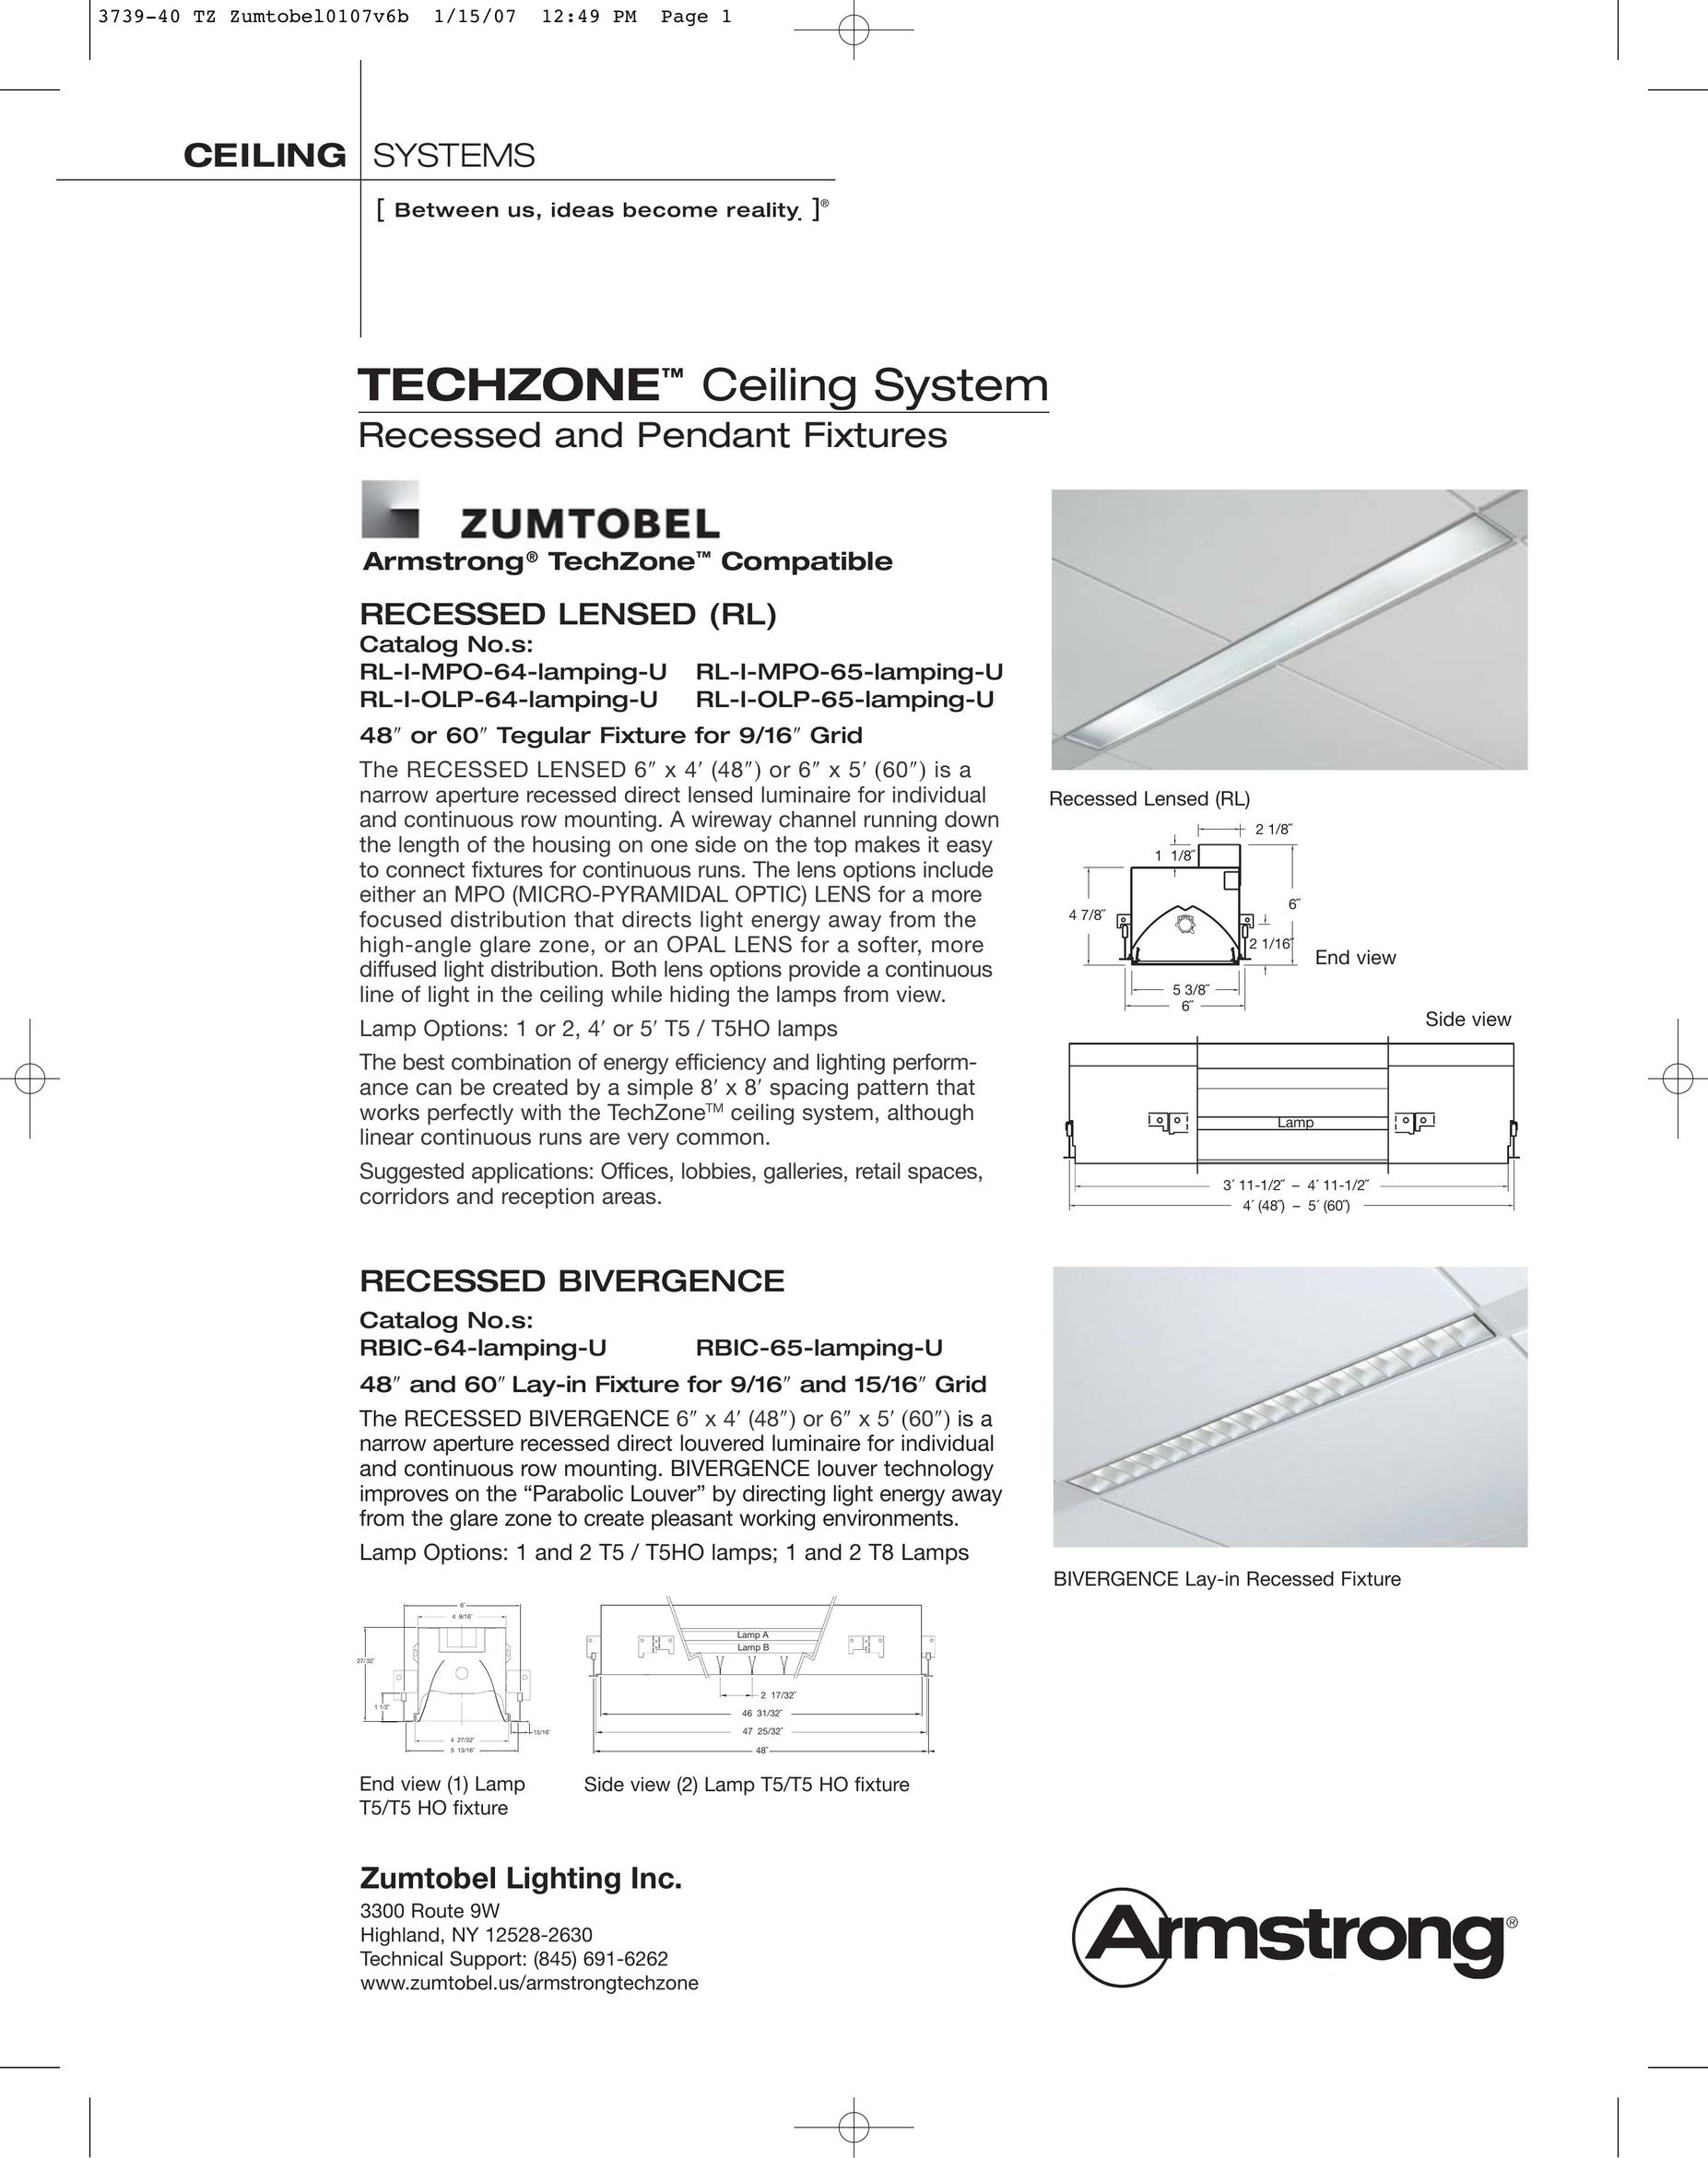 Armstrong World Industries Ceiling Lighting System Indoor Furnishings User Manual